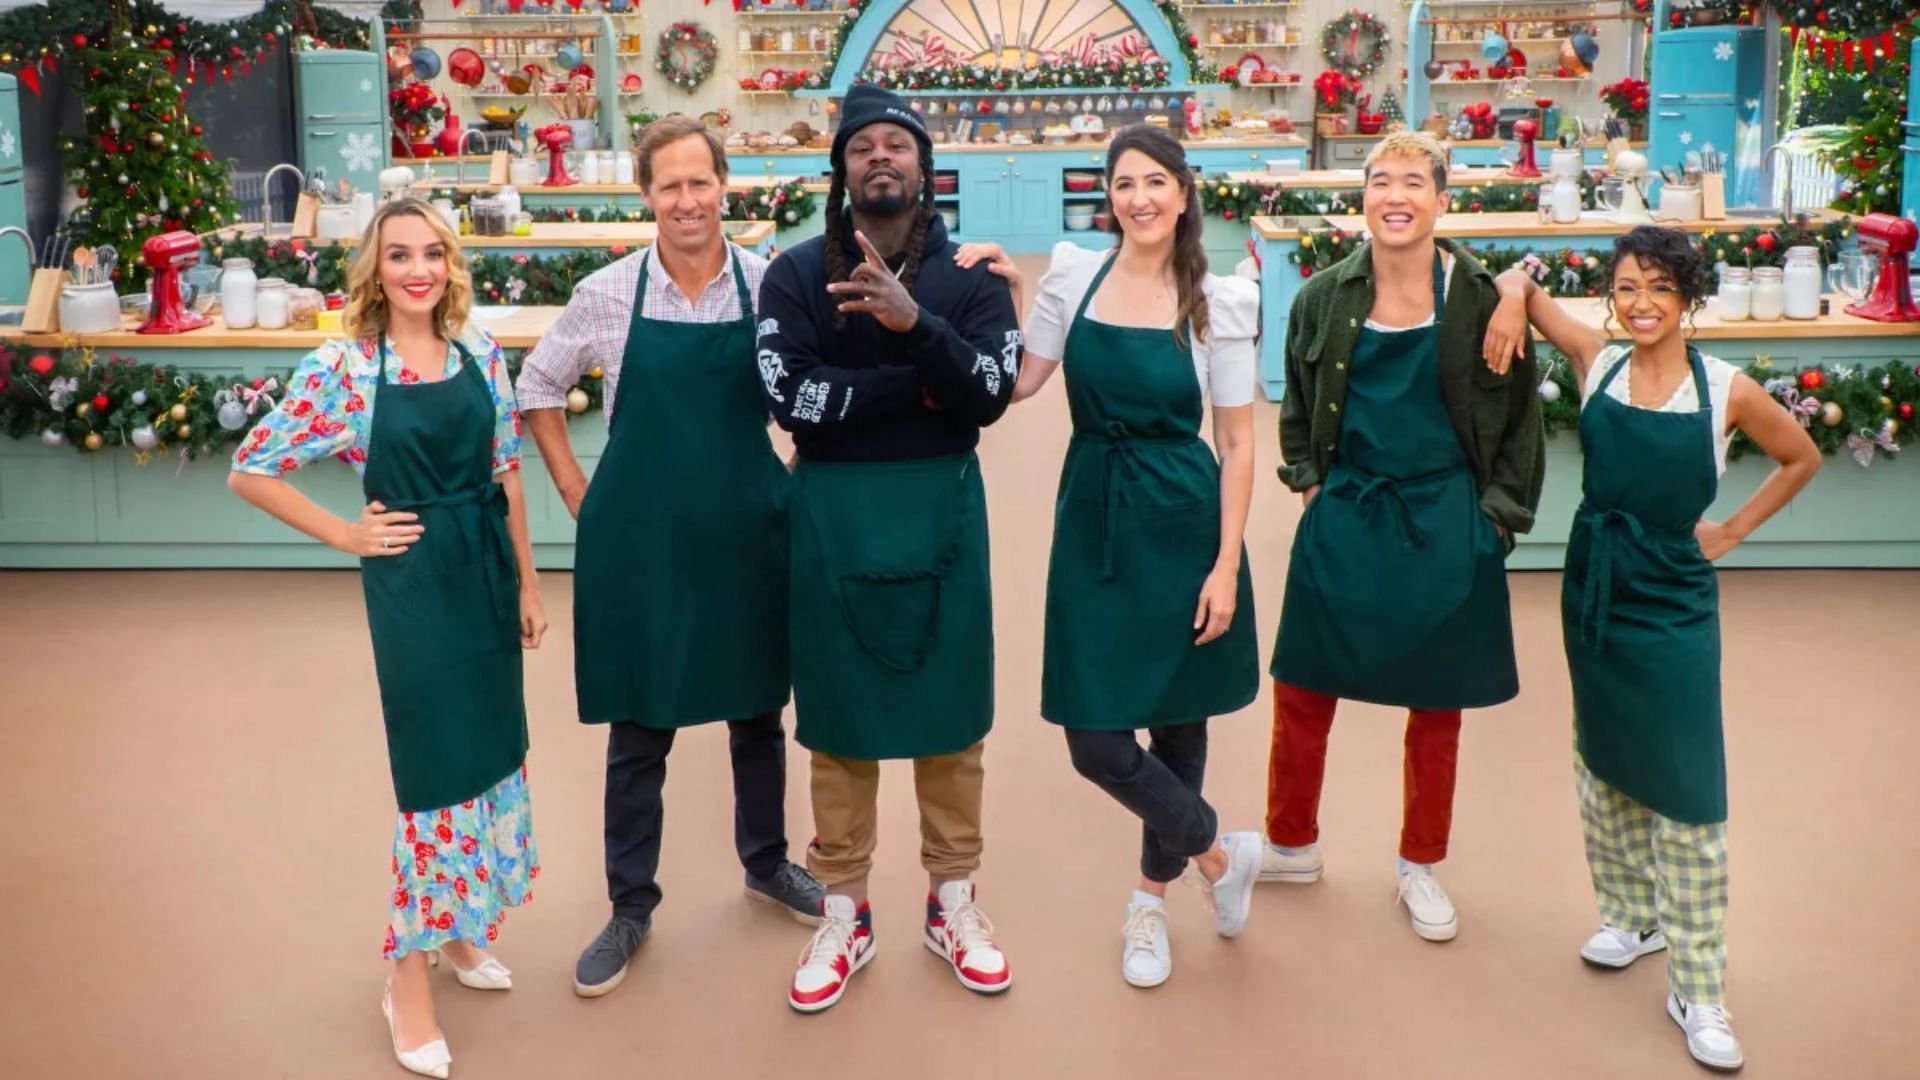 The Great American Baking Show: Celebrity Holiday cast